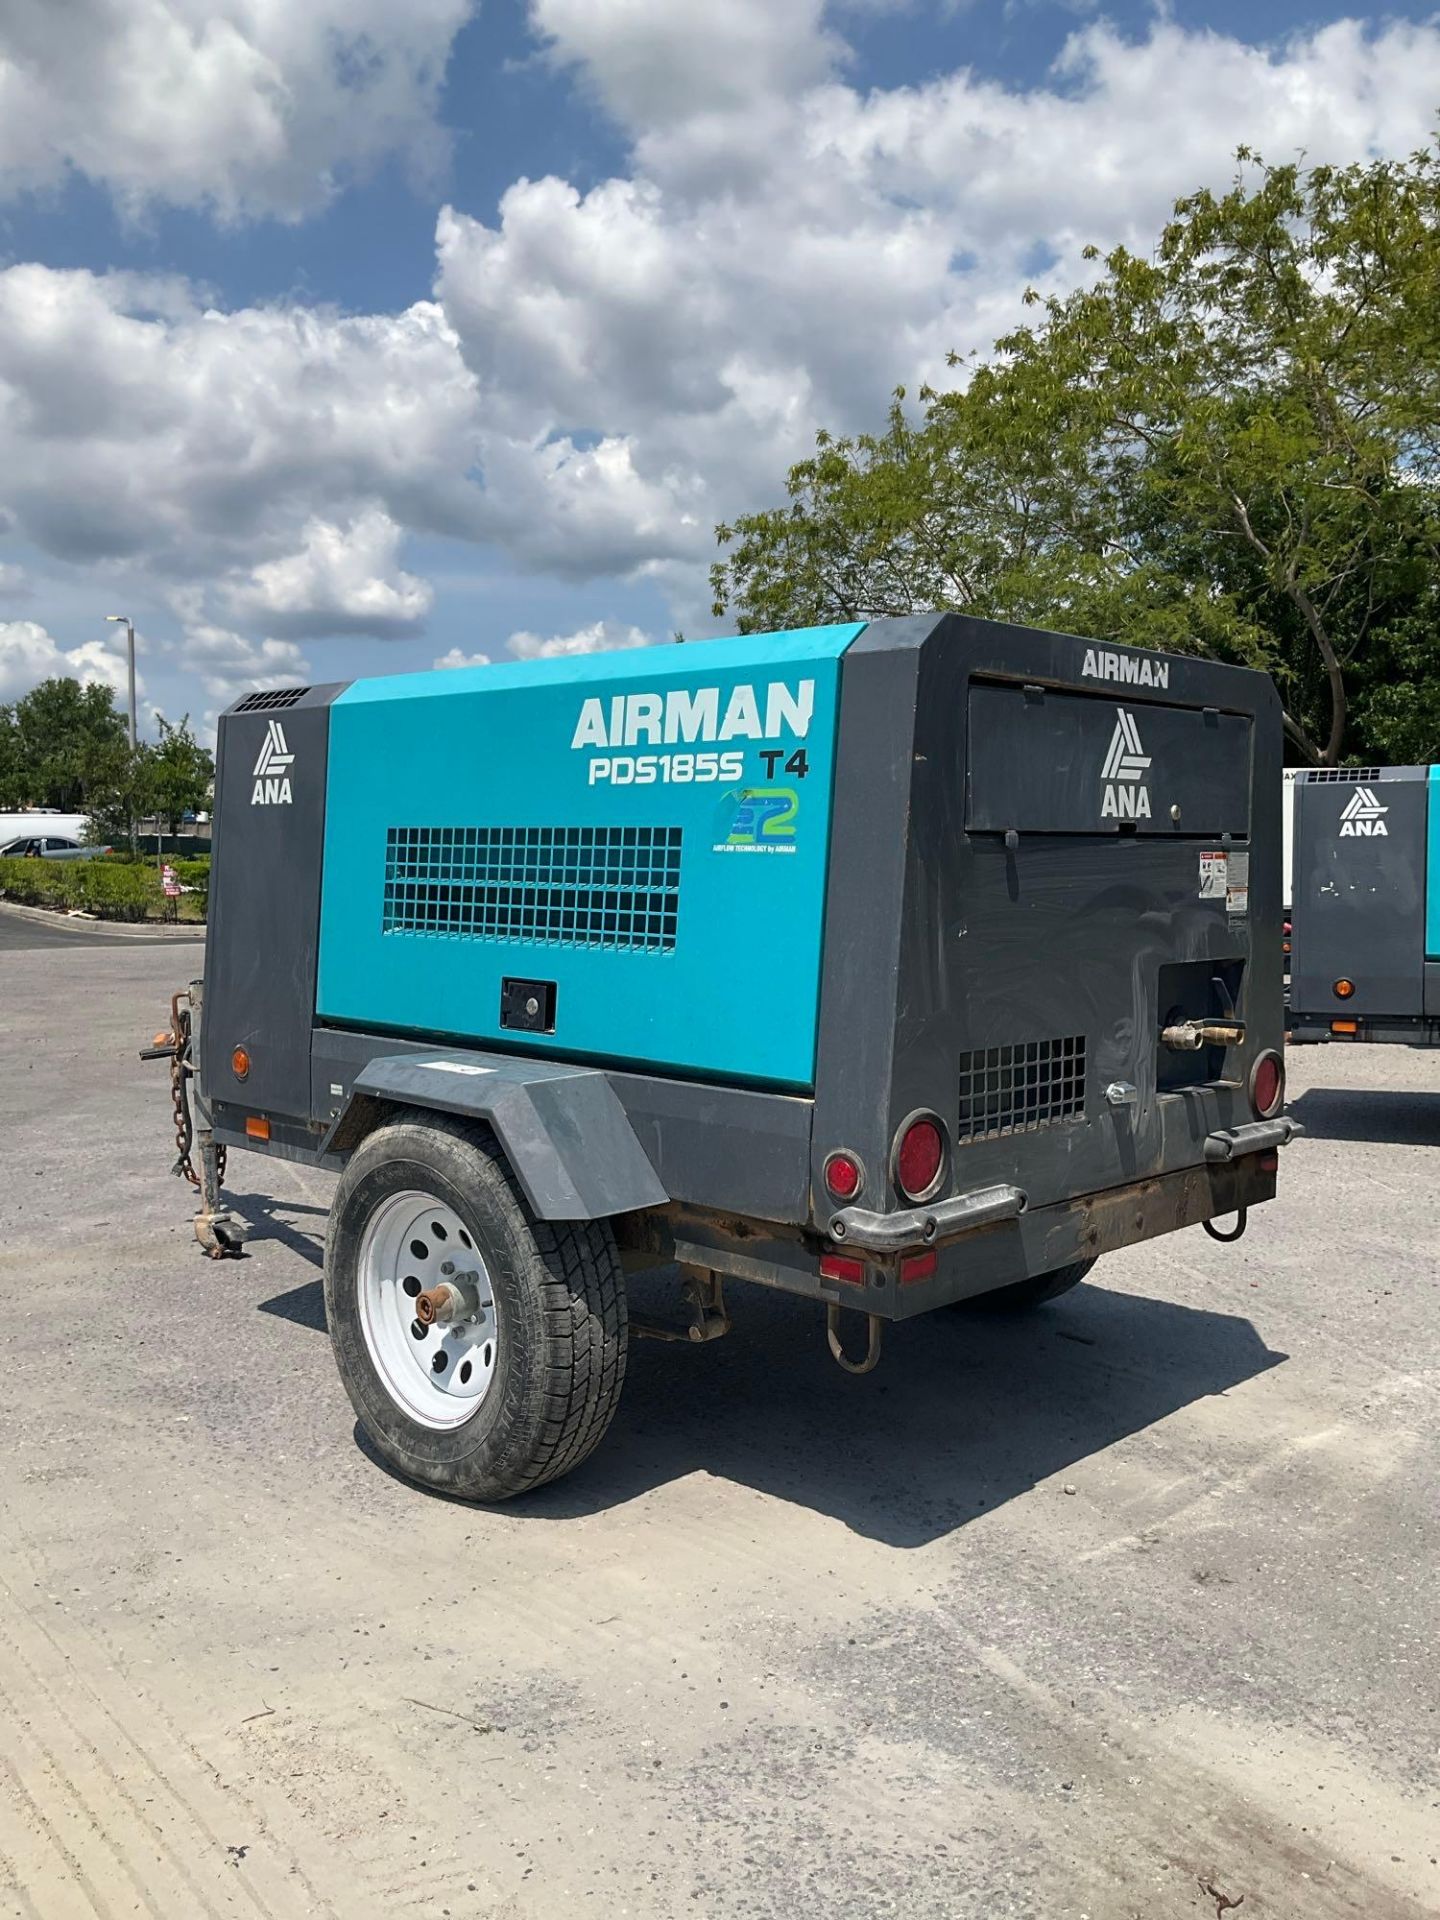 2022 AIRMAN PDS185S-6E1 COMPRESSOR, DIESEL, TRAILER MOUNTED, NORMAL OPERATING PRESSURE 0.69 MPA, ... - Image 3 of 19